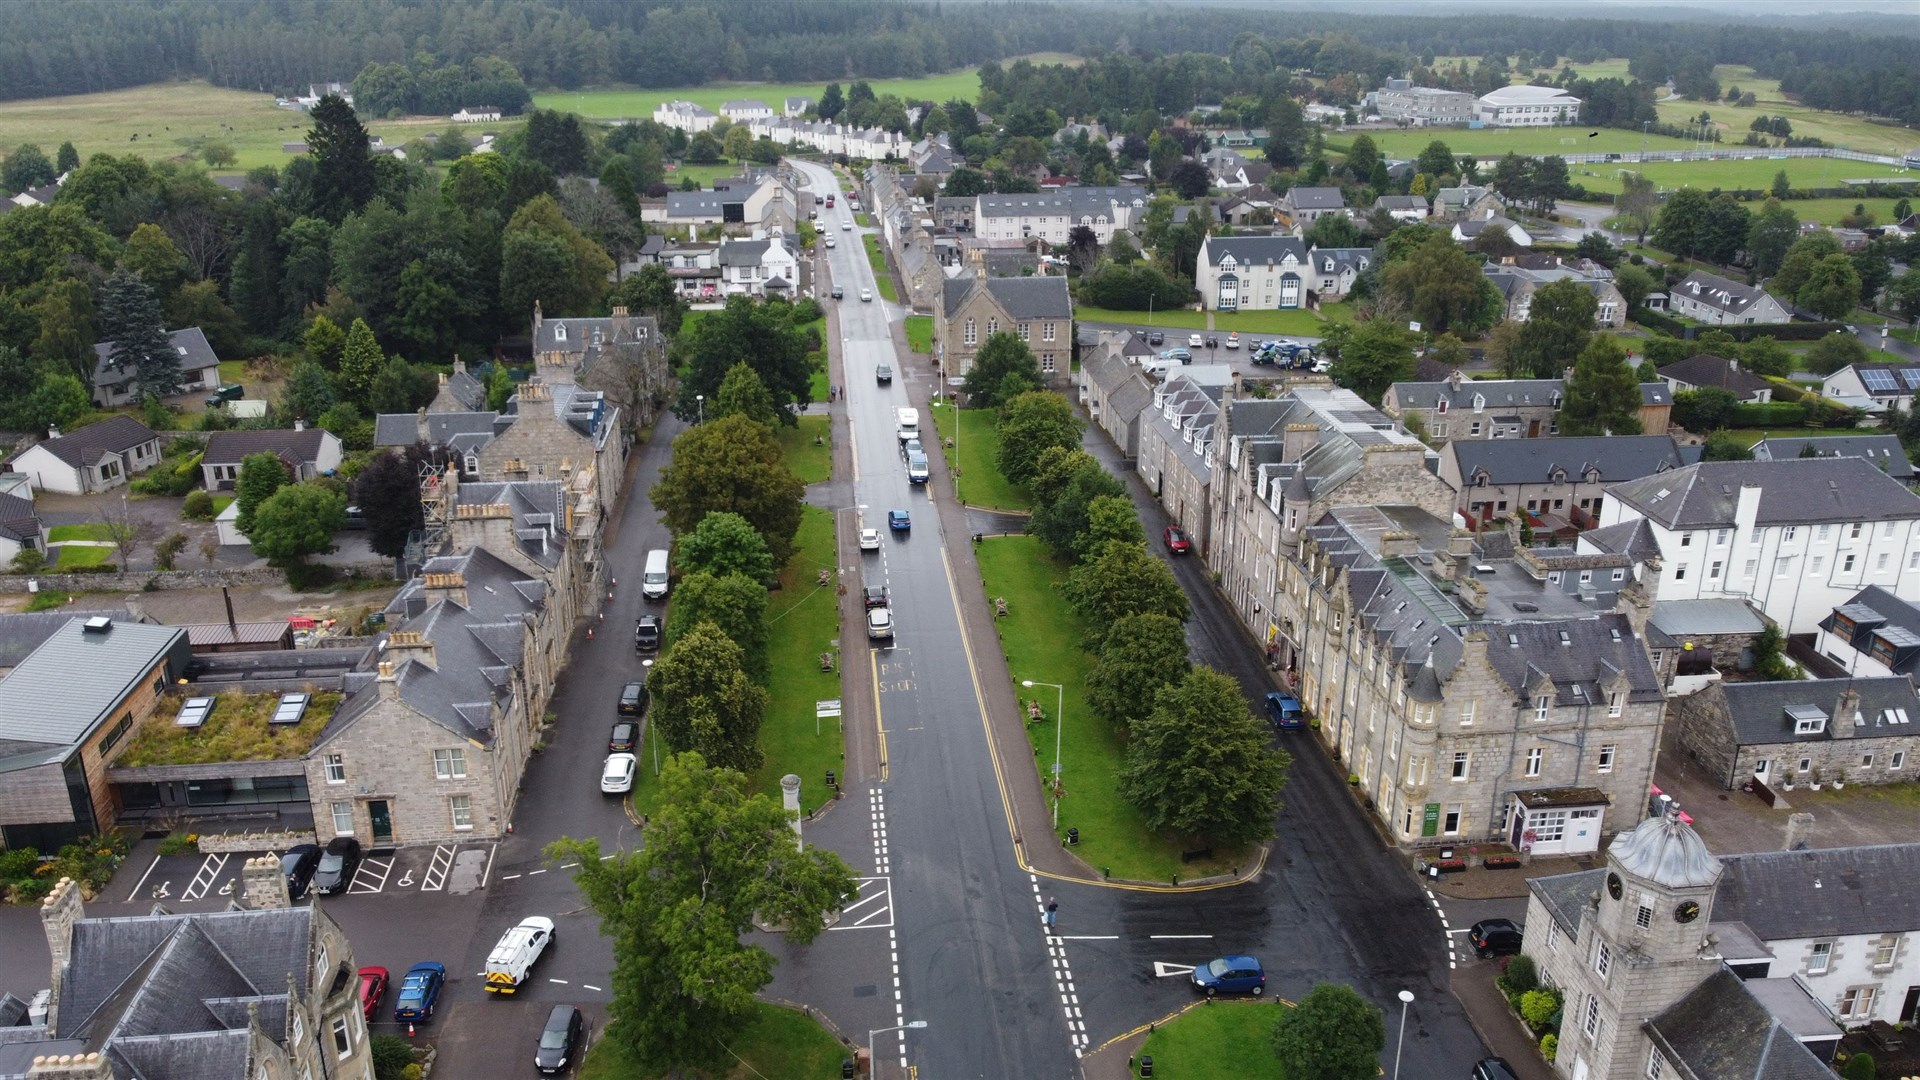 Properties booked on Airbnb, Booking.com and other commercial lets would require a change of use planning application if zone is established for Grantown (pictured) and wider strath.